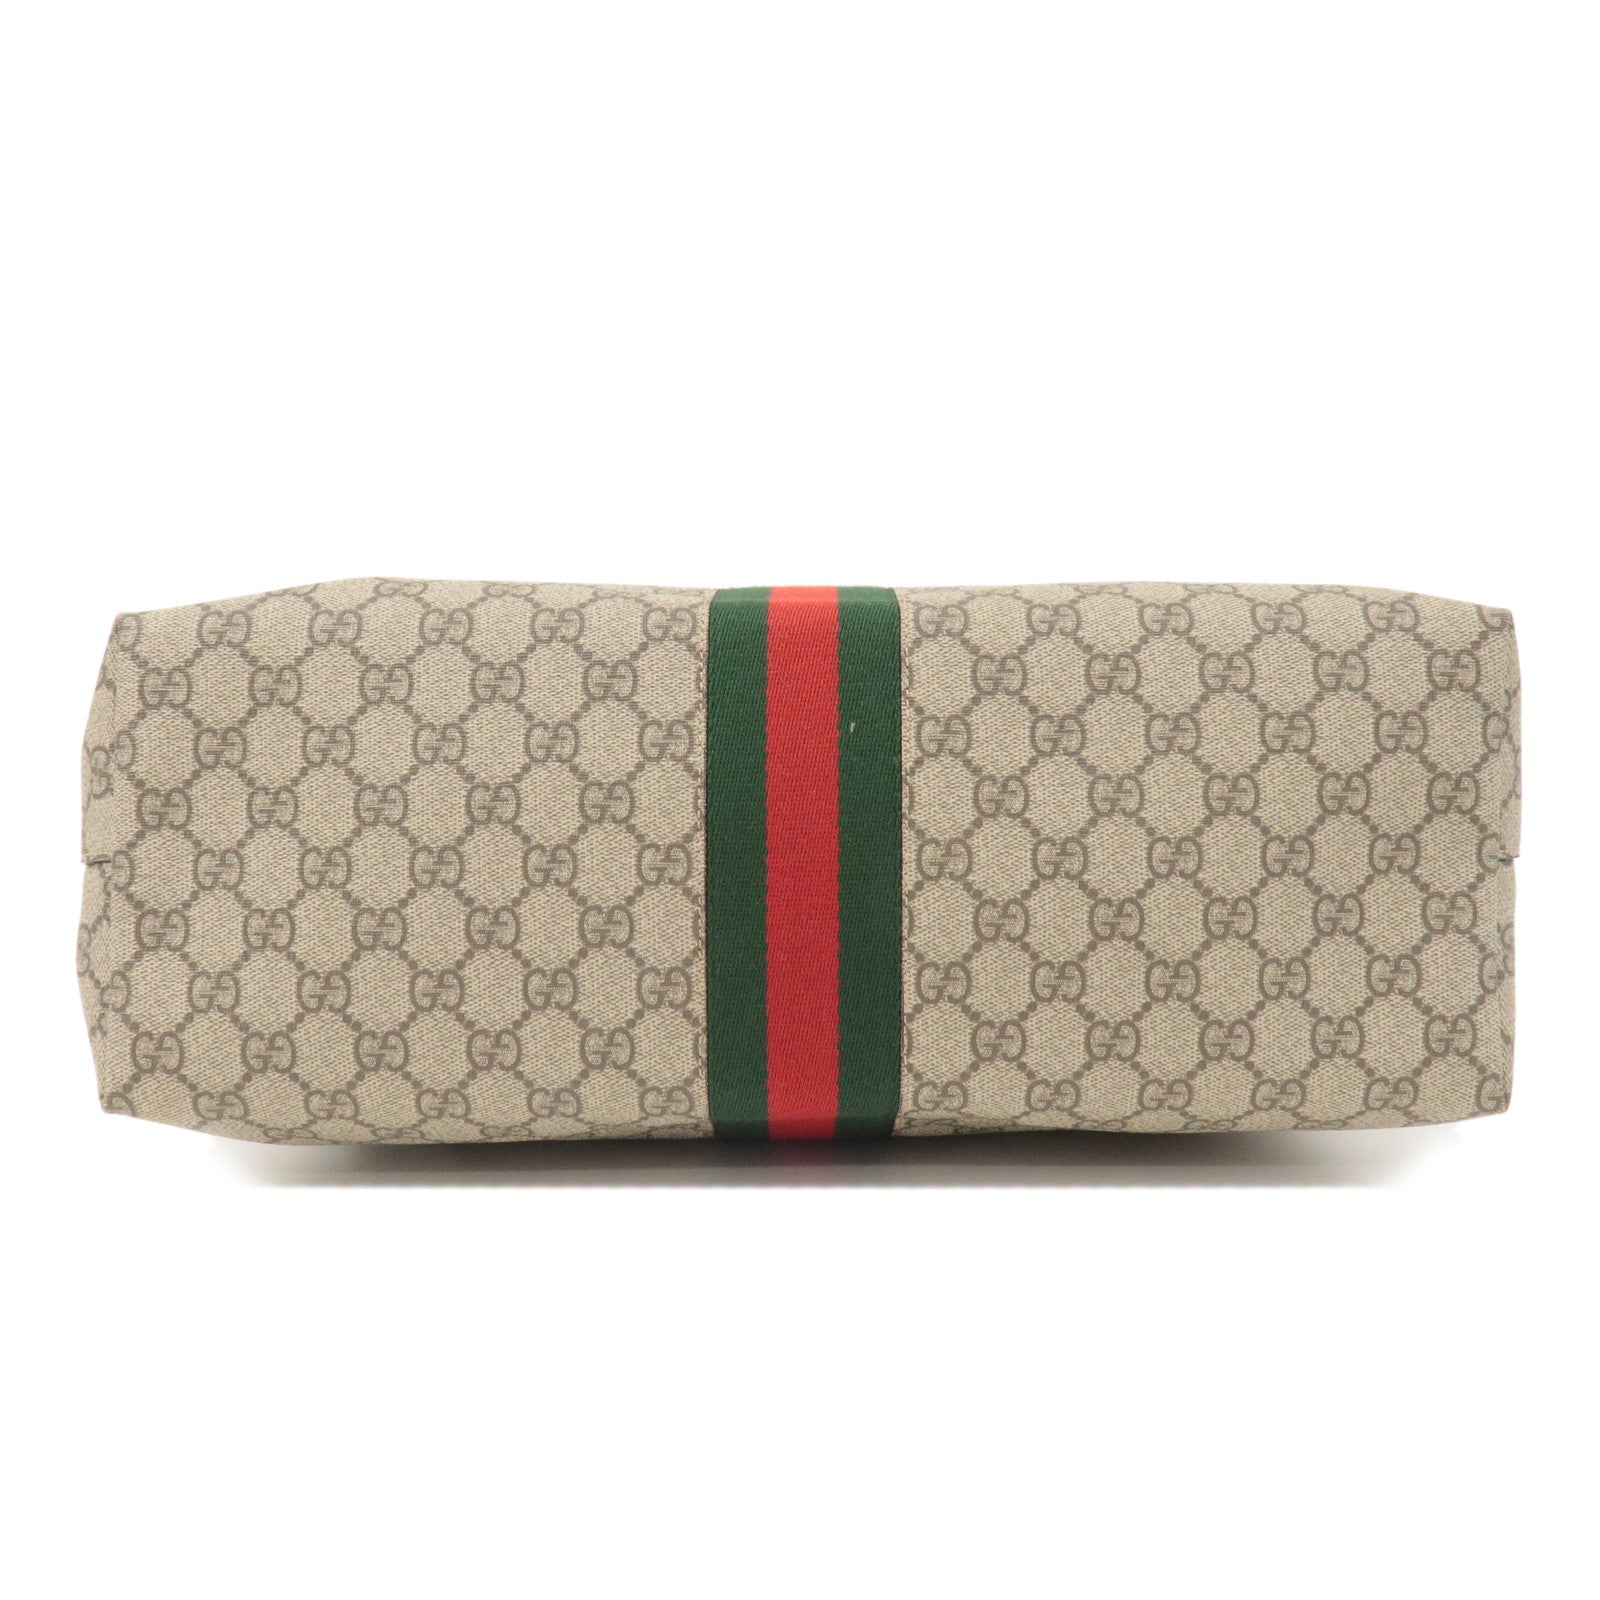 GG Supreme Ophidia Toiletry Case